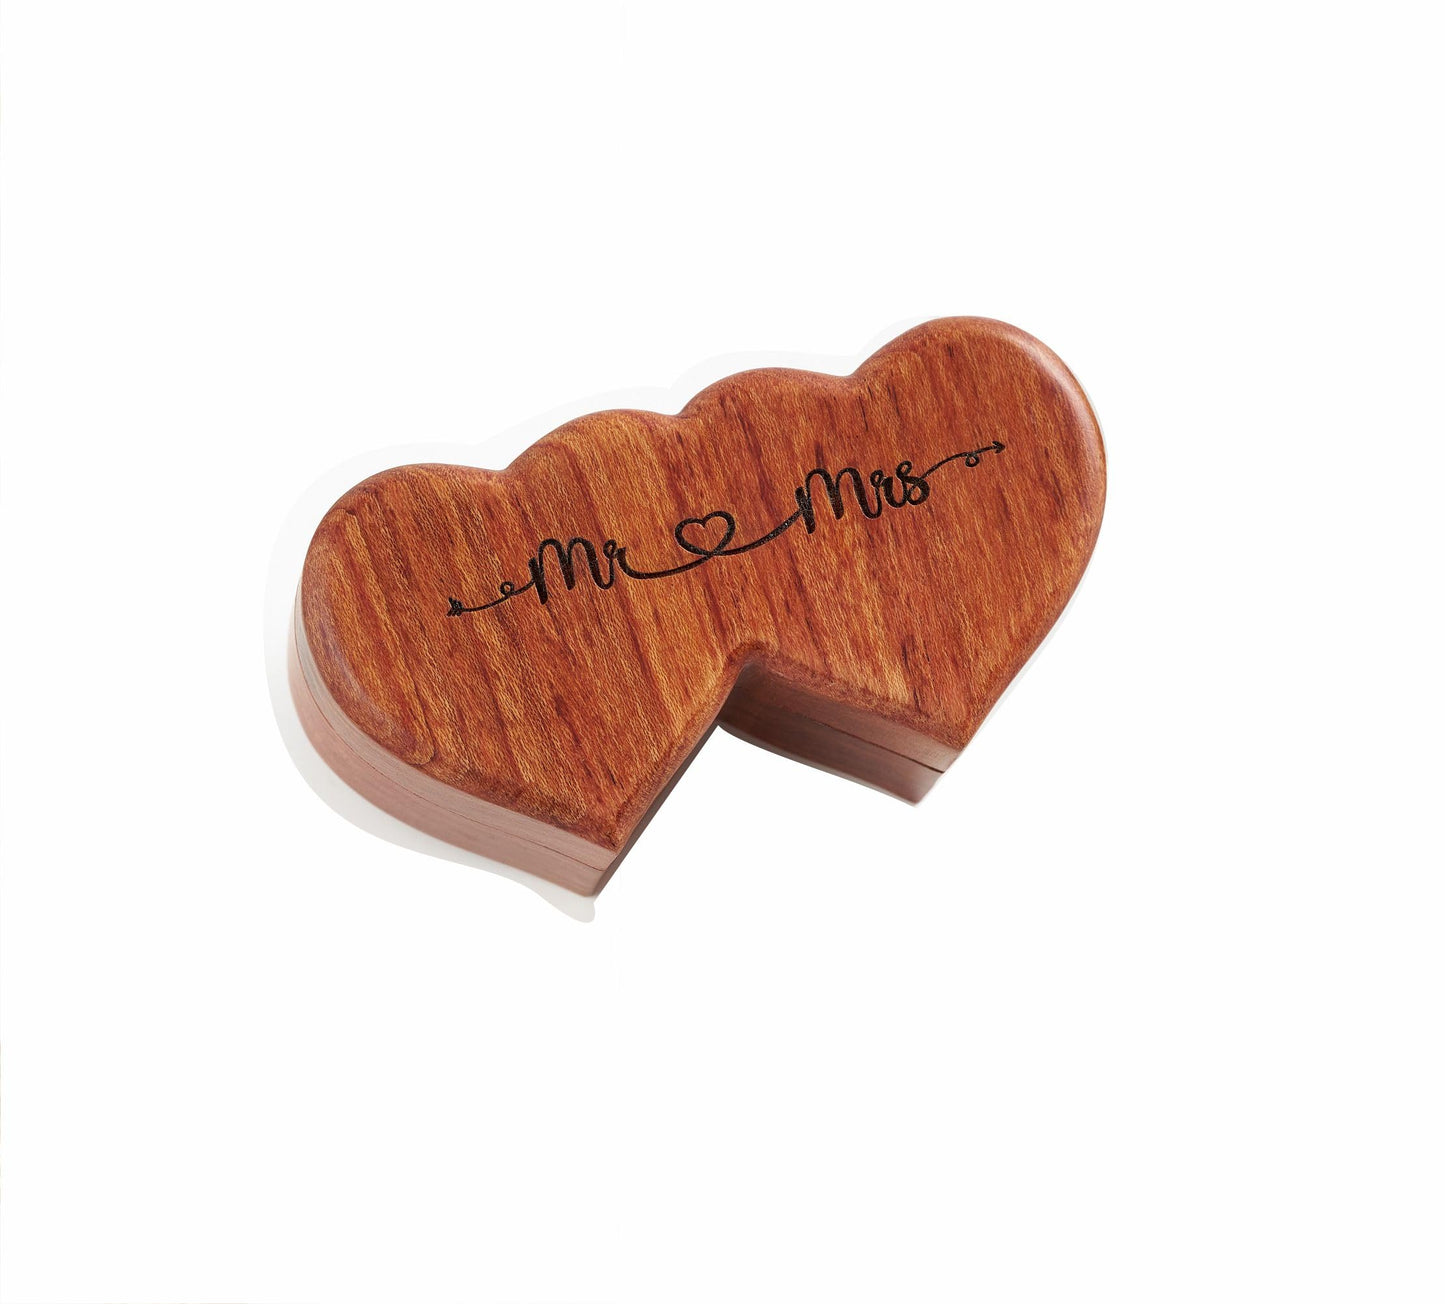 Handicraftviet Ring Box Mr and Mrs – Handmade Heart Shape Ring Box for Wedding Ceremony, Wedding Ring Box Small Engraved for Engagement/Proposal,